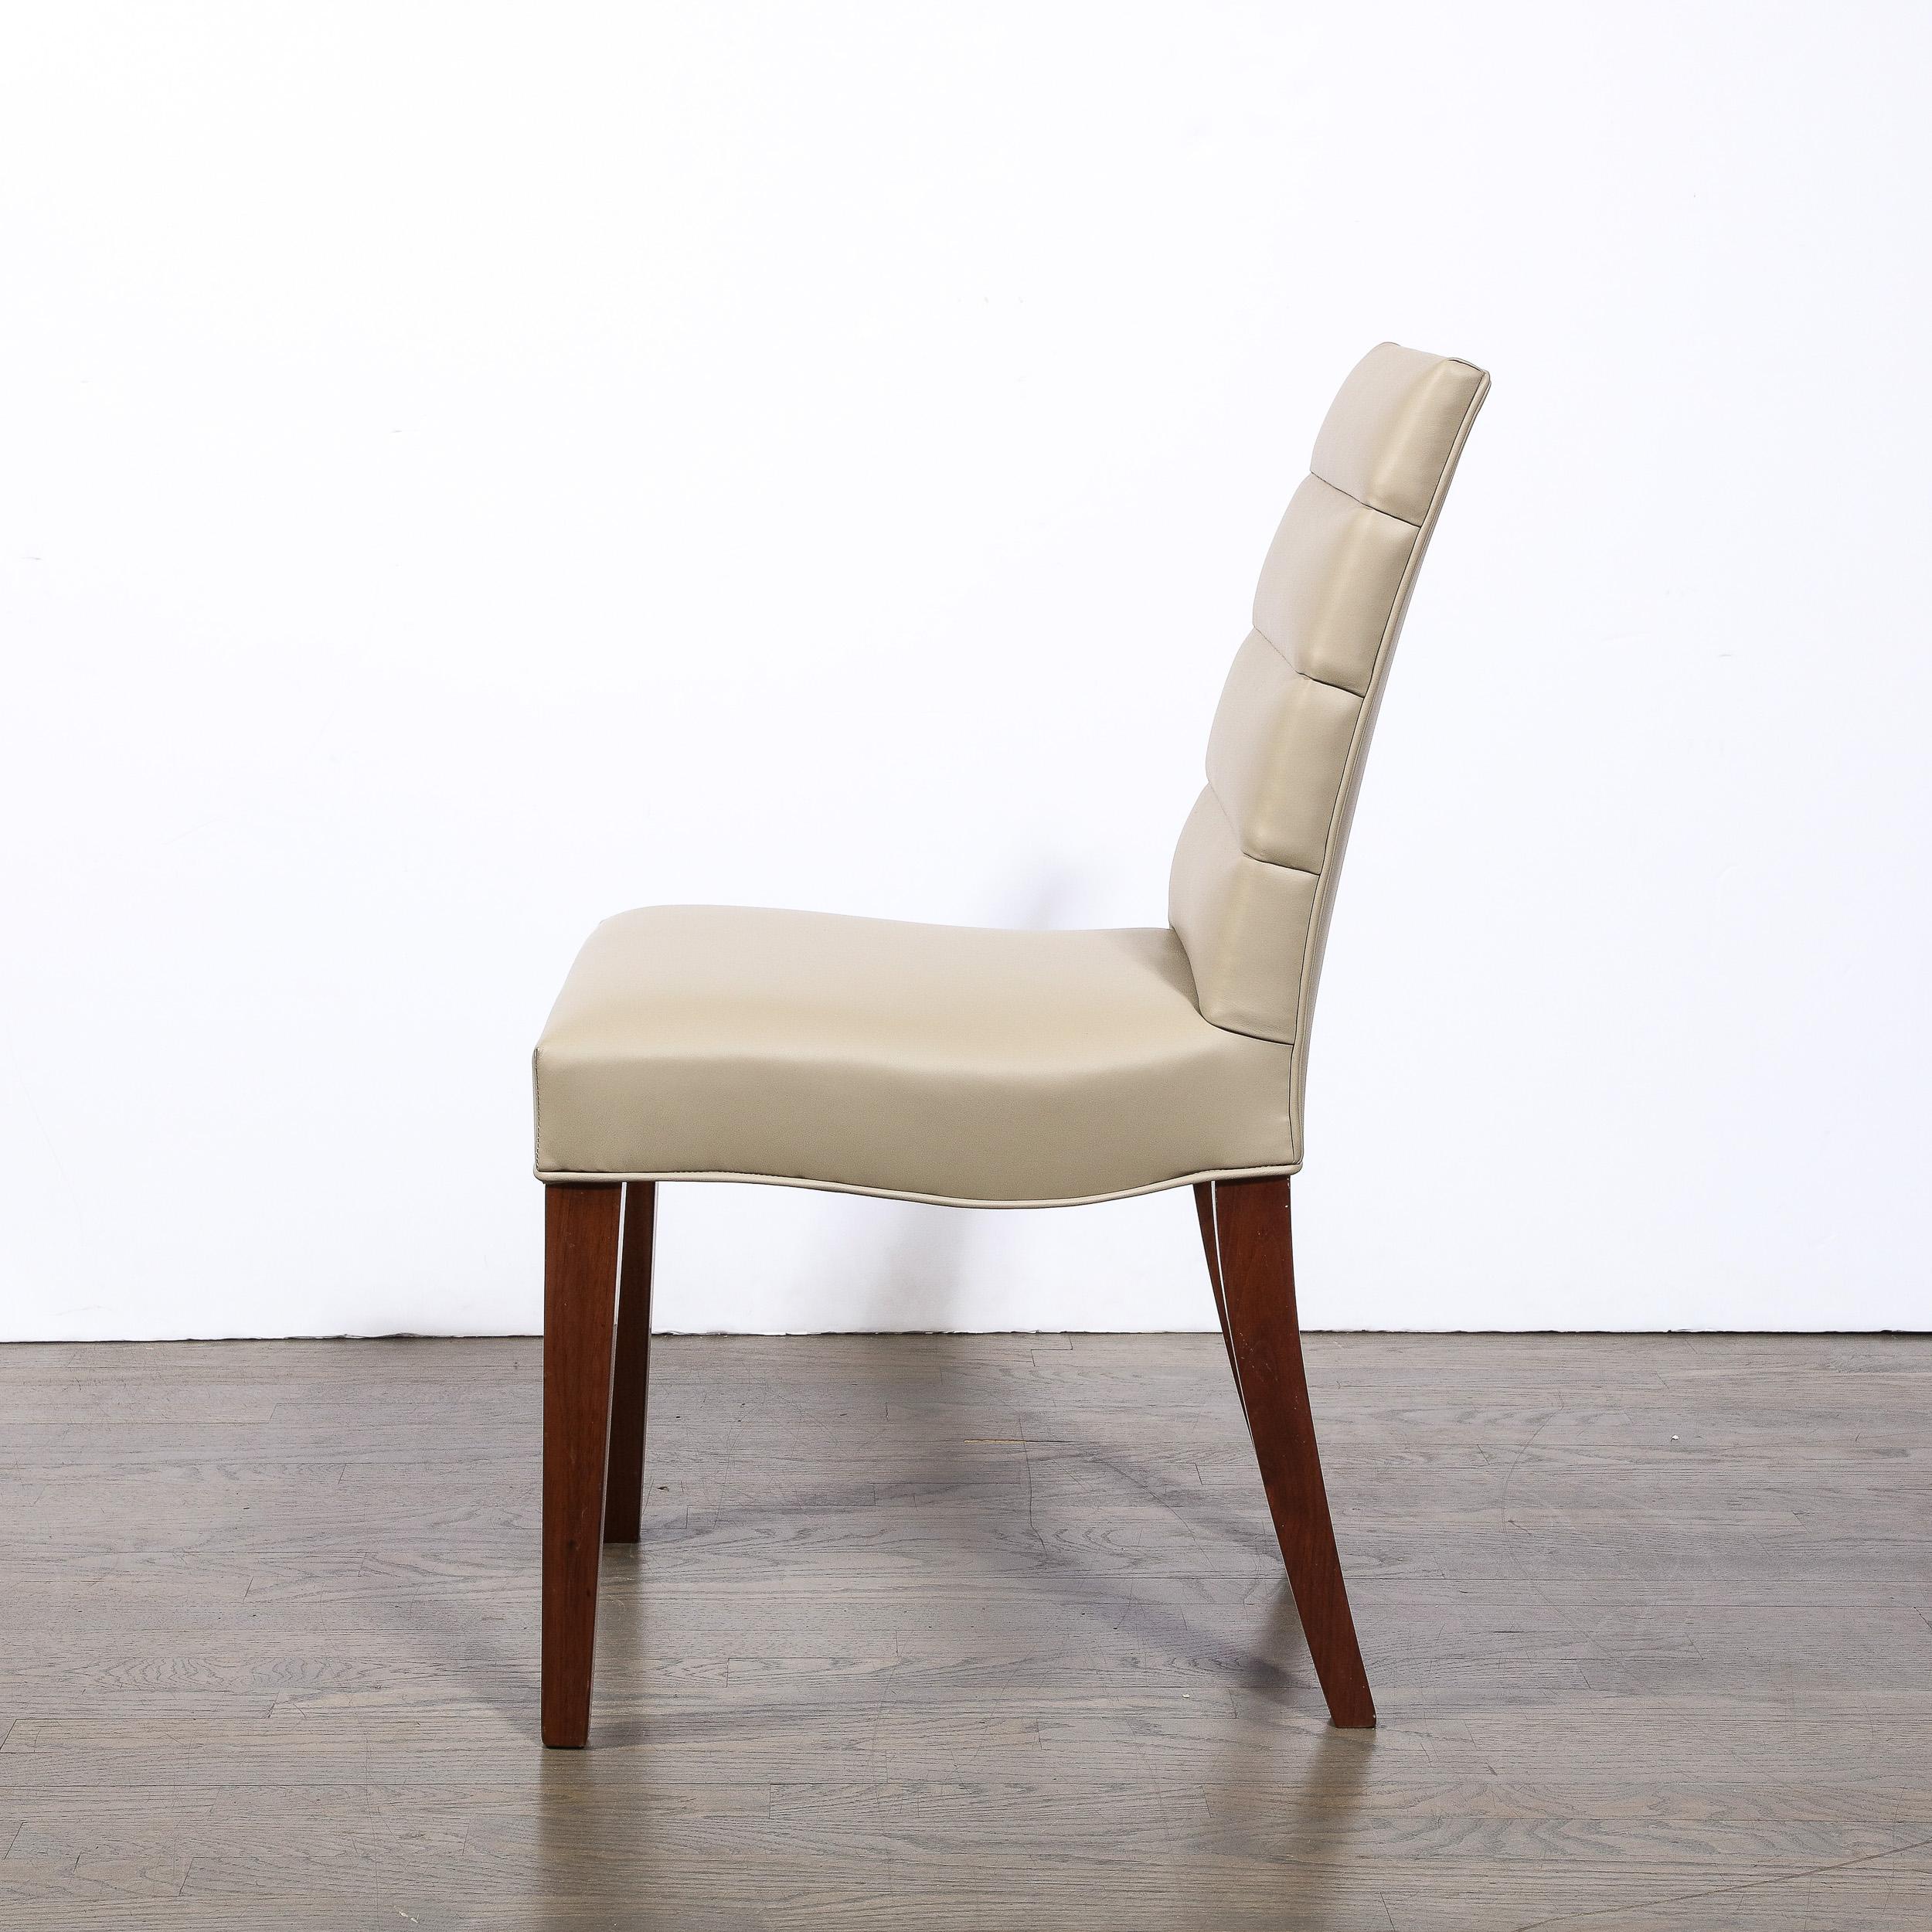 Art Deco Gilbert Rohde Chair in Holly Hunt Leather w/ Tufted Back & Walnut Legs For Sale 1